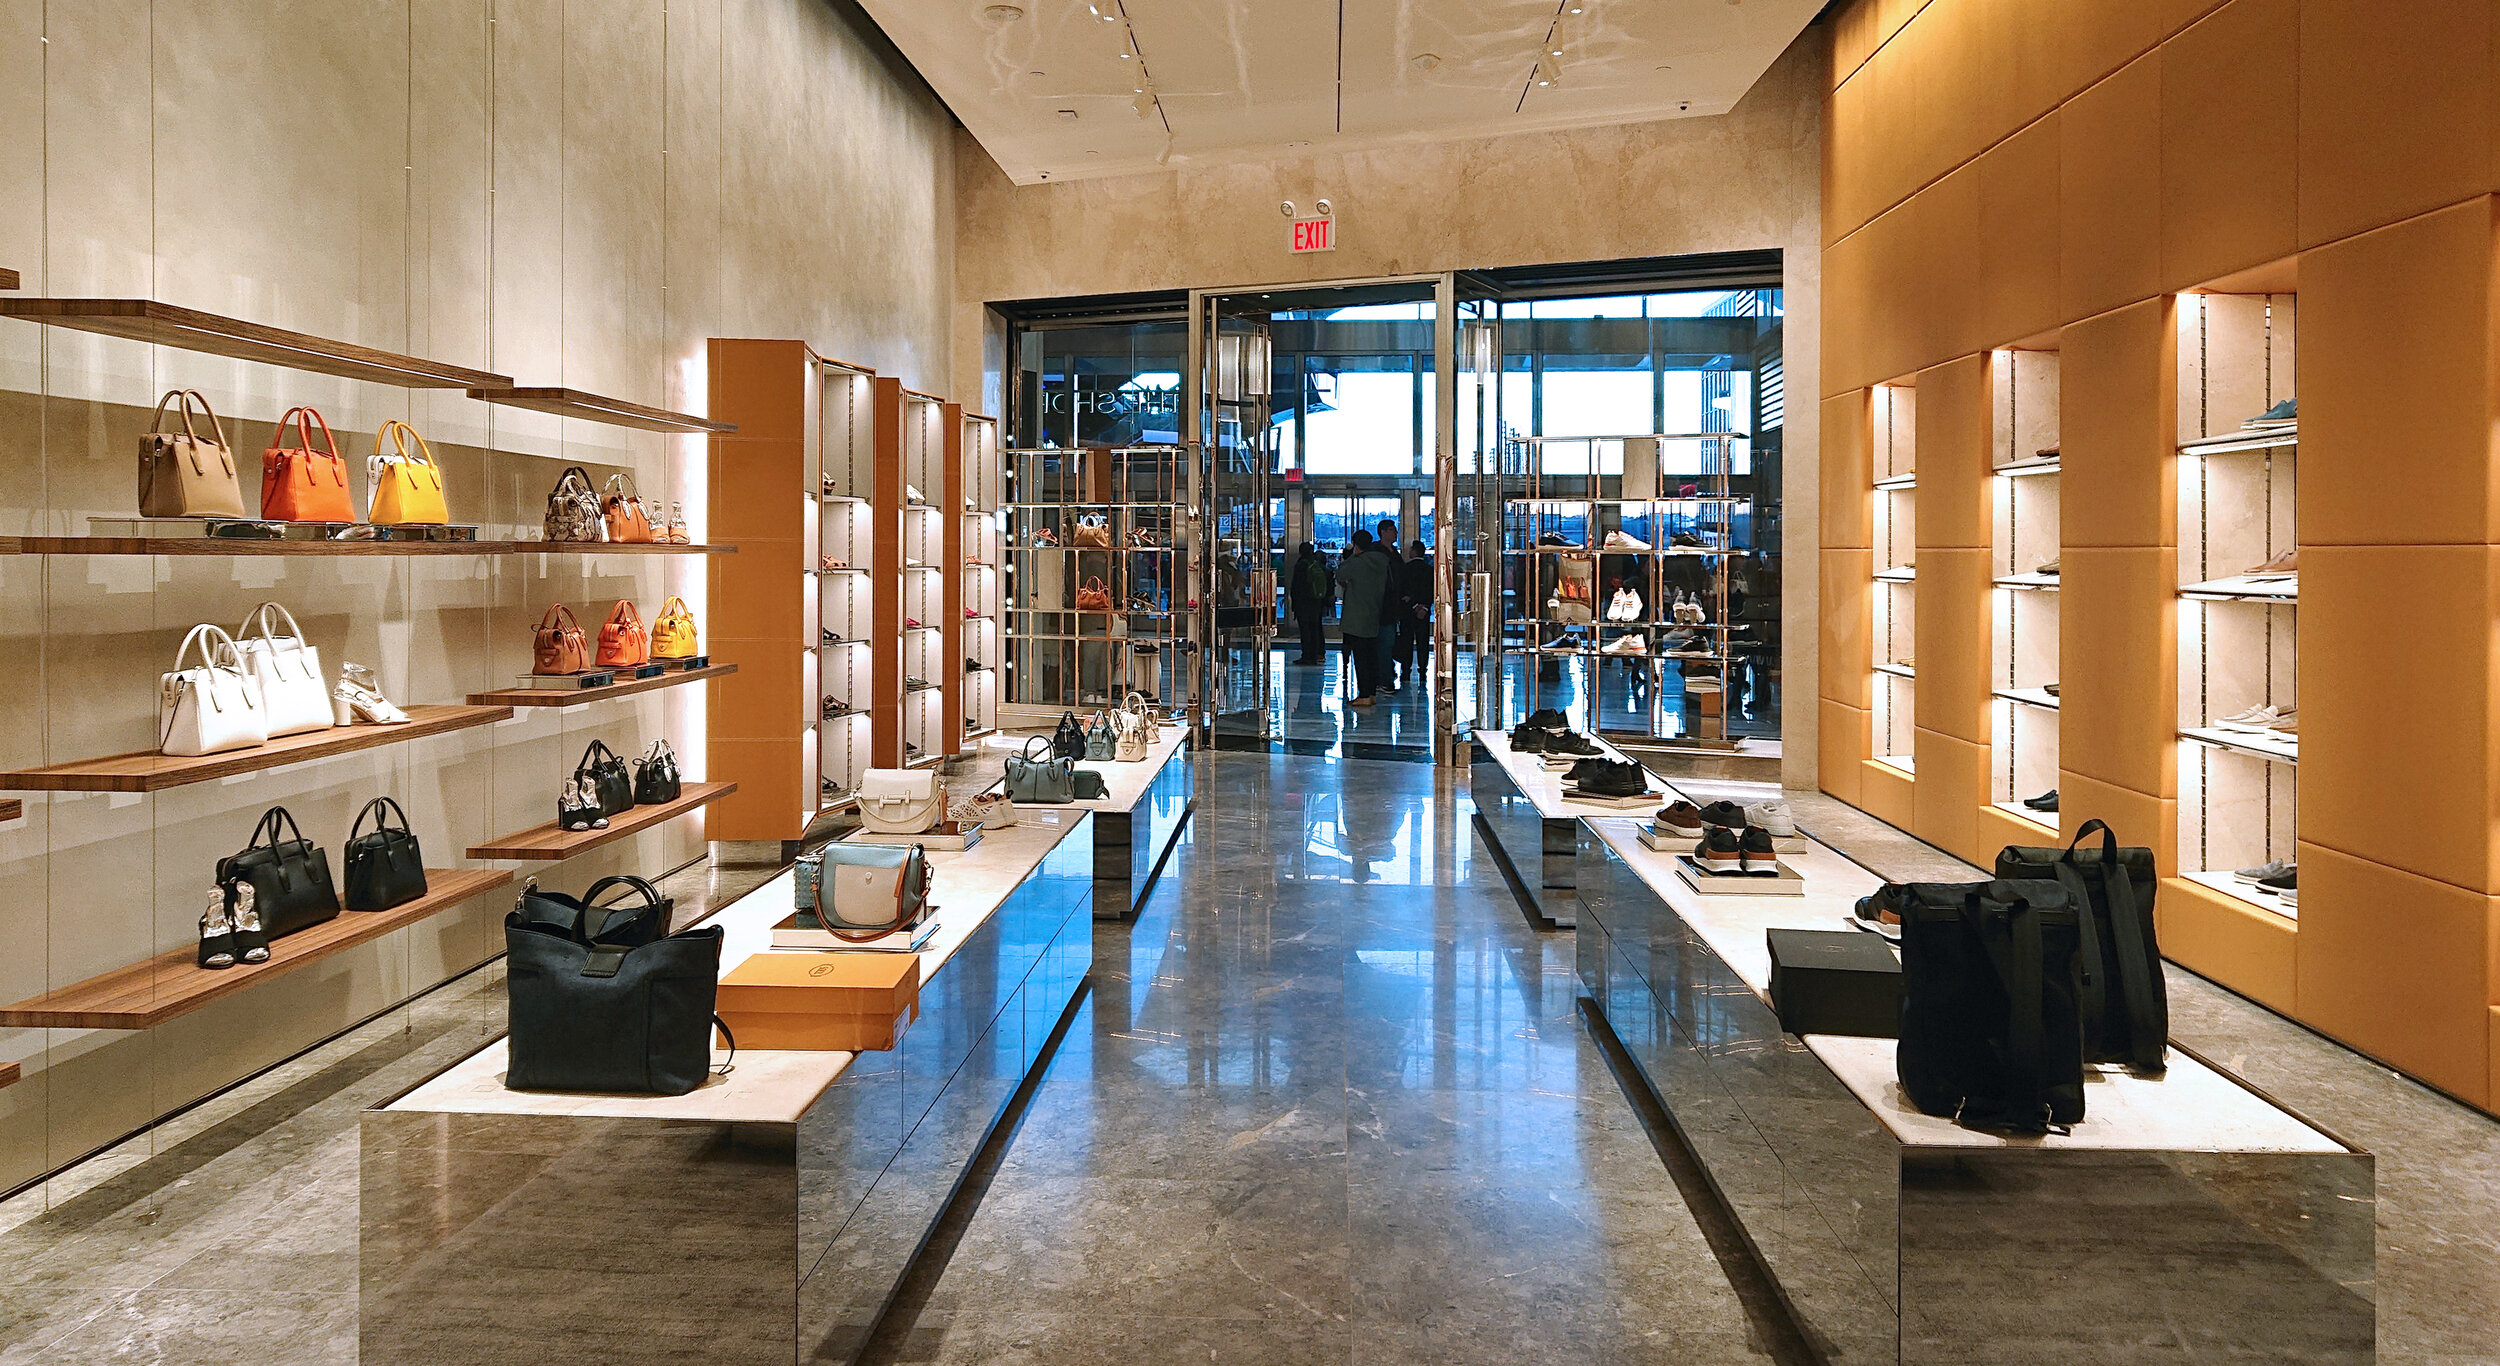  Tod’s Hudson Yards - Store Interior View  